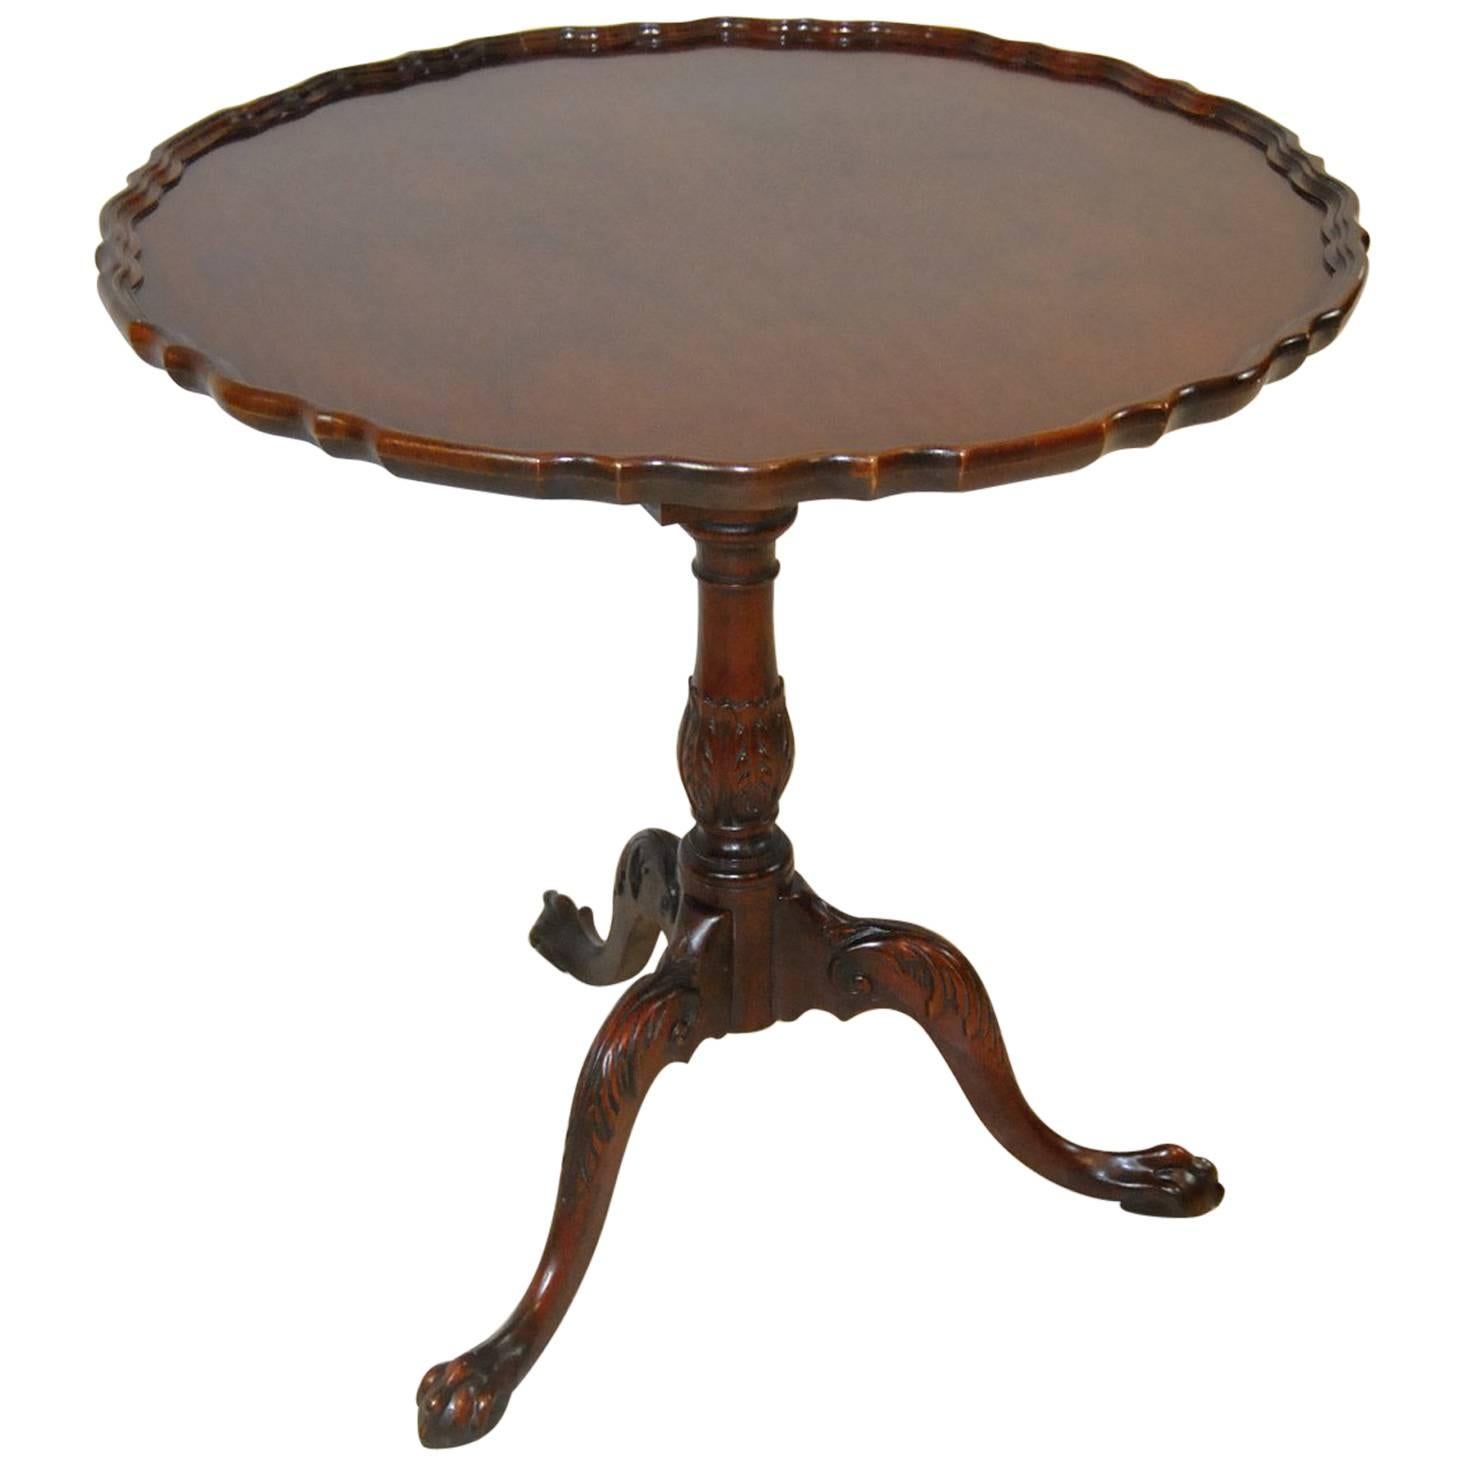 Chippendale Style Mahogany Pie Crust Tilt-Top Table by Baker Furniture